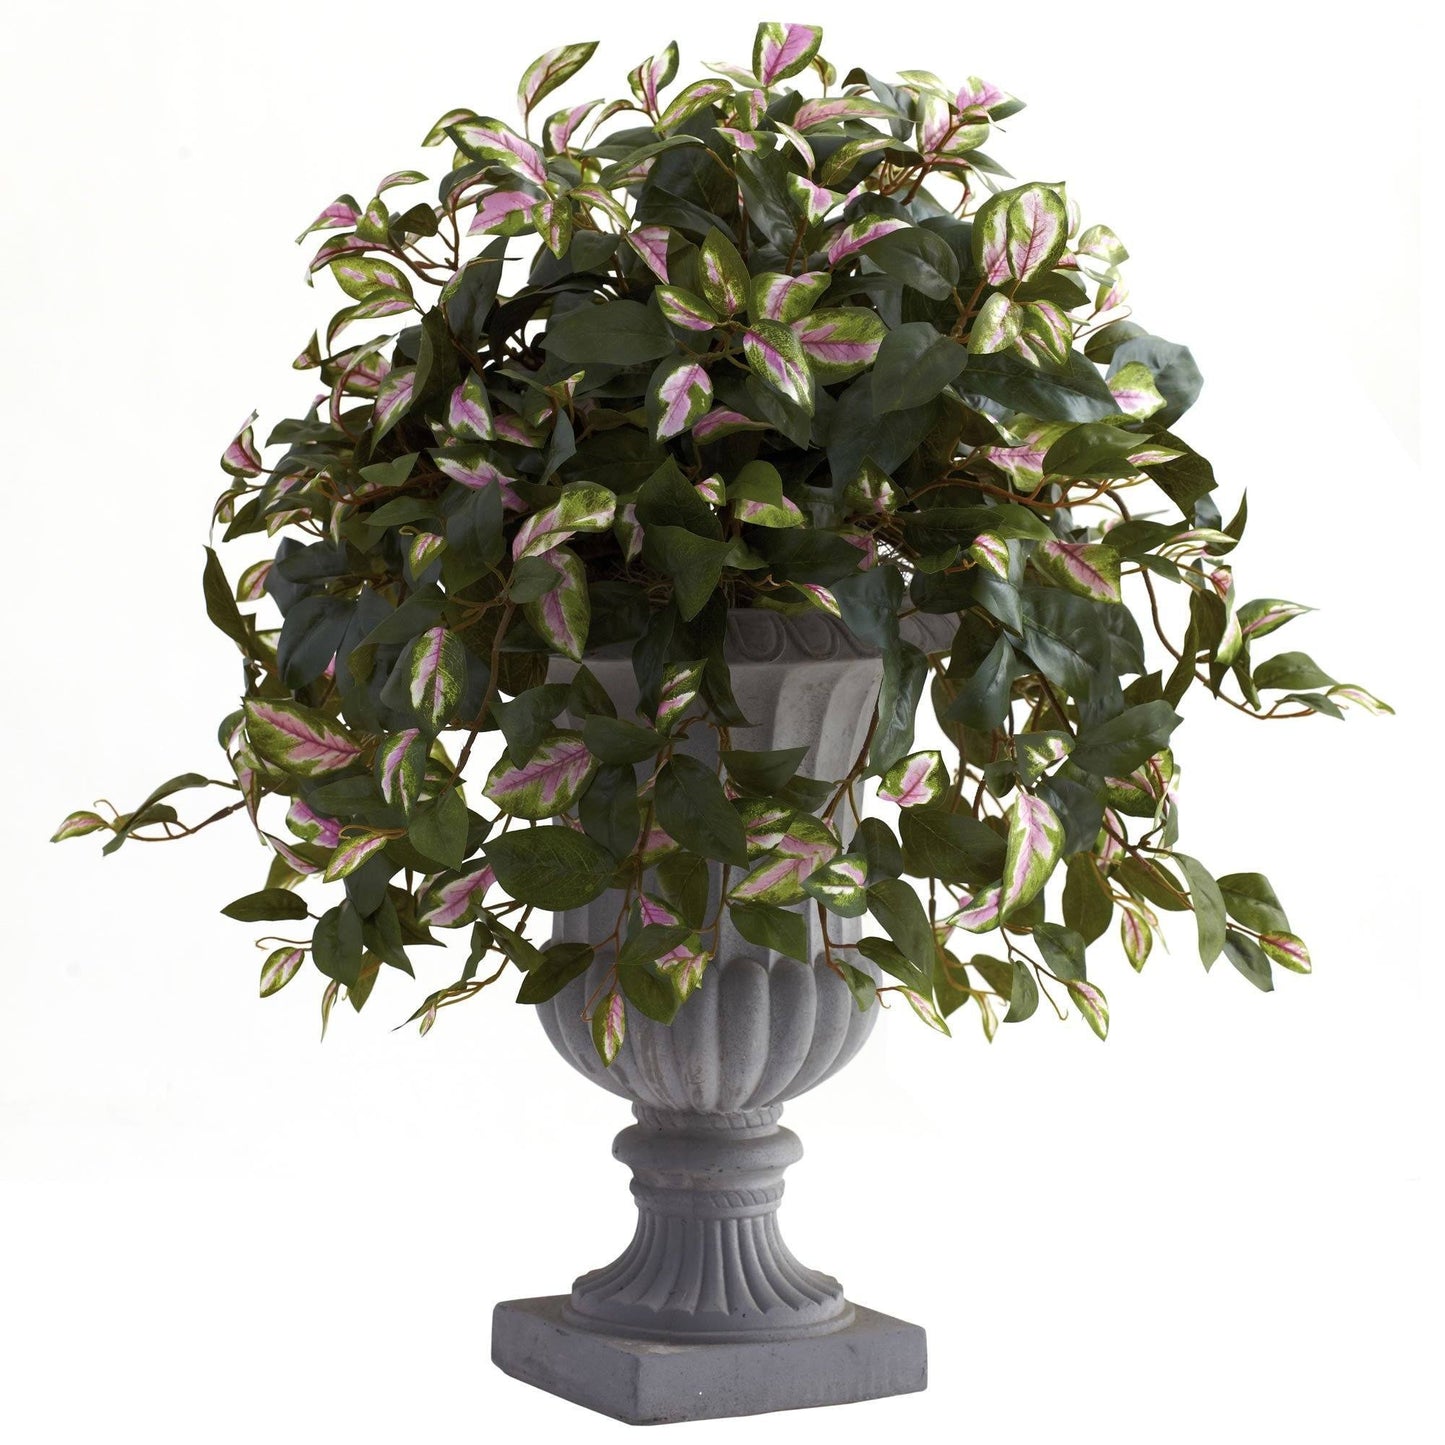 Hoya with Decorative Urn | Nearly Natural